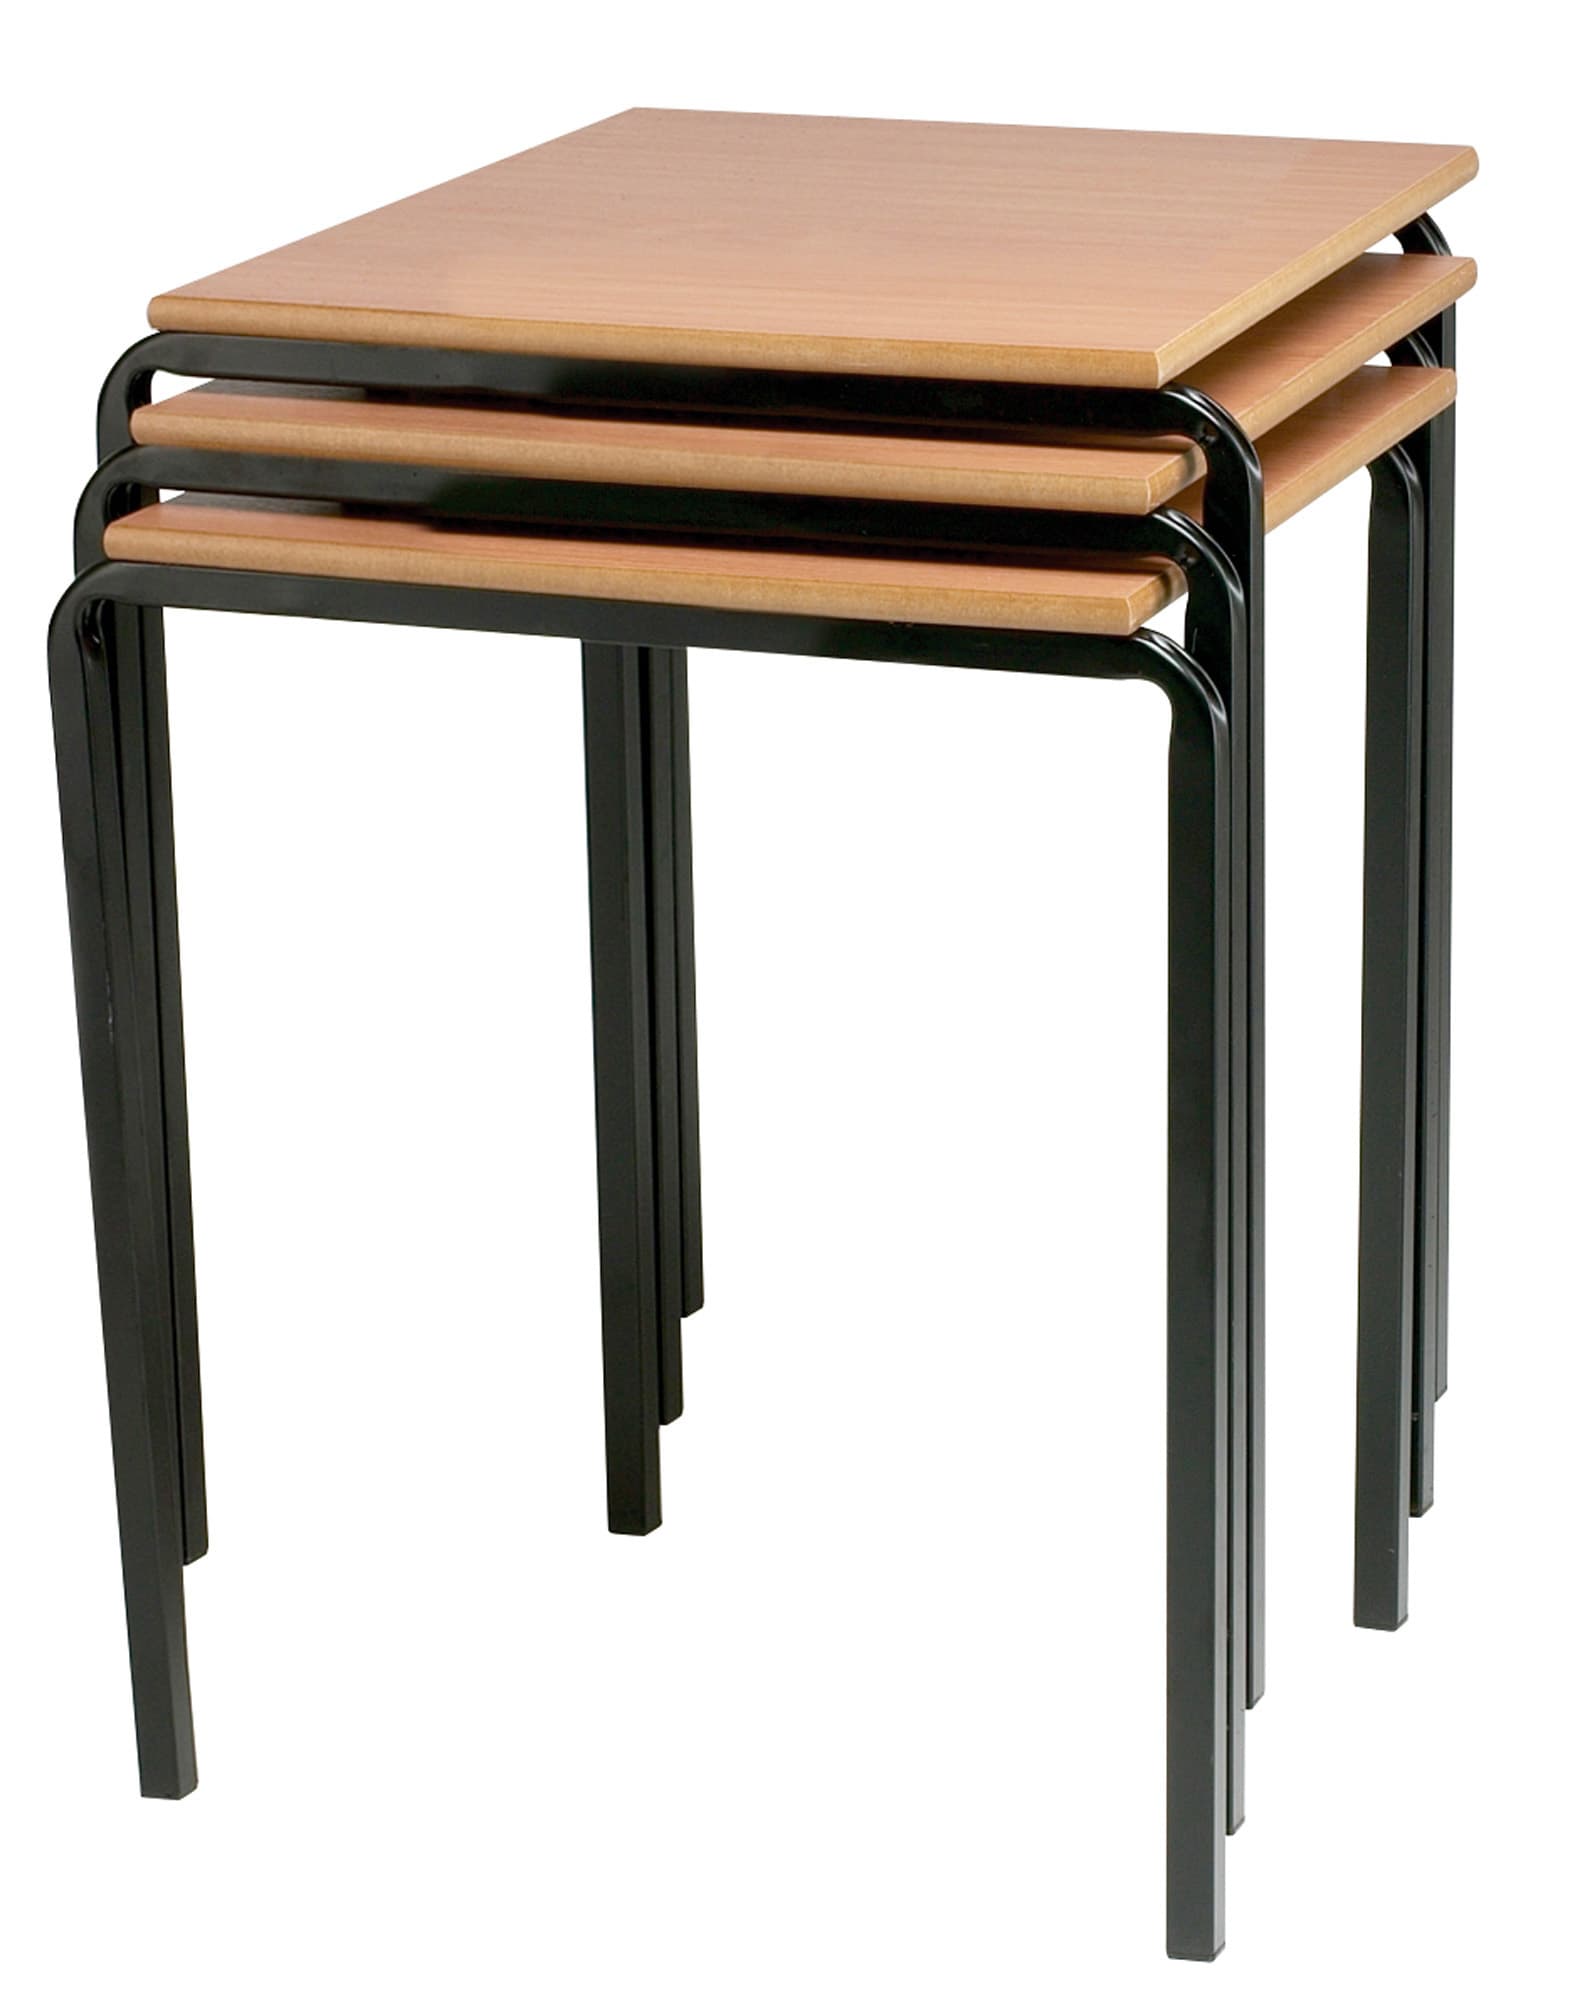 Crushbent Square Classroom Tables